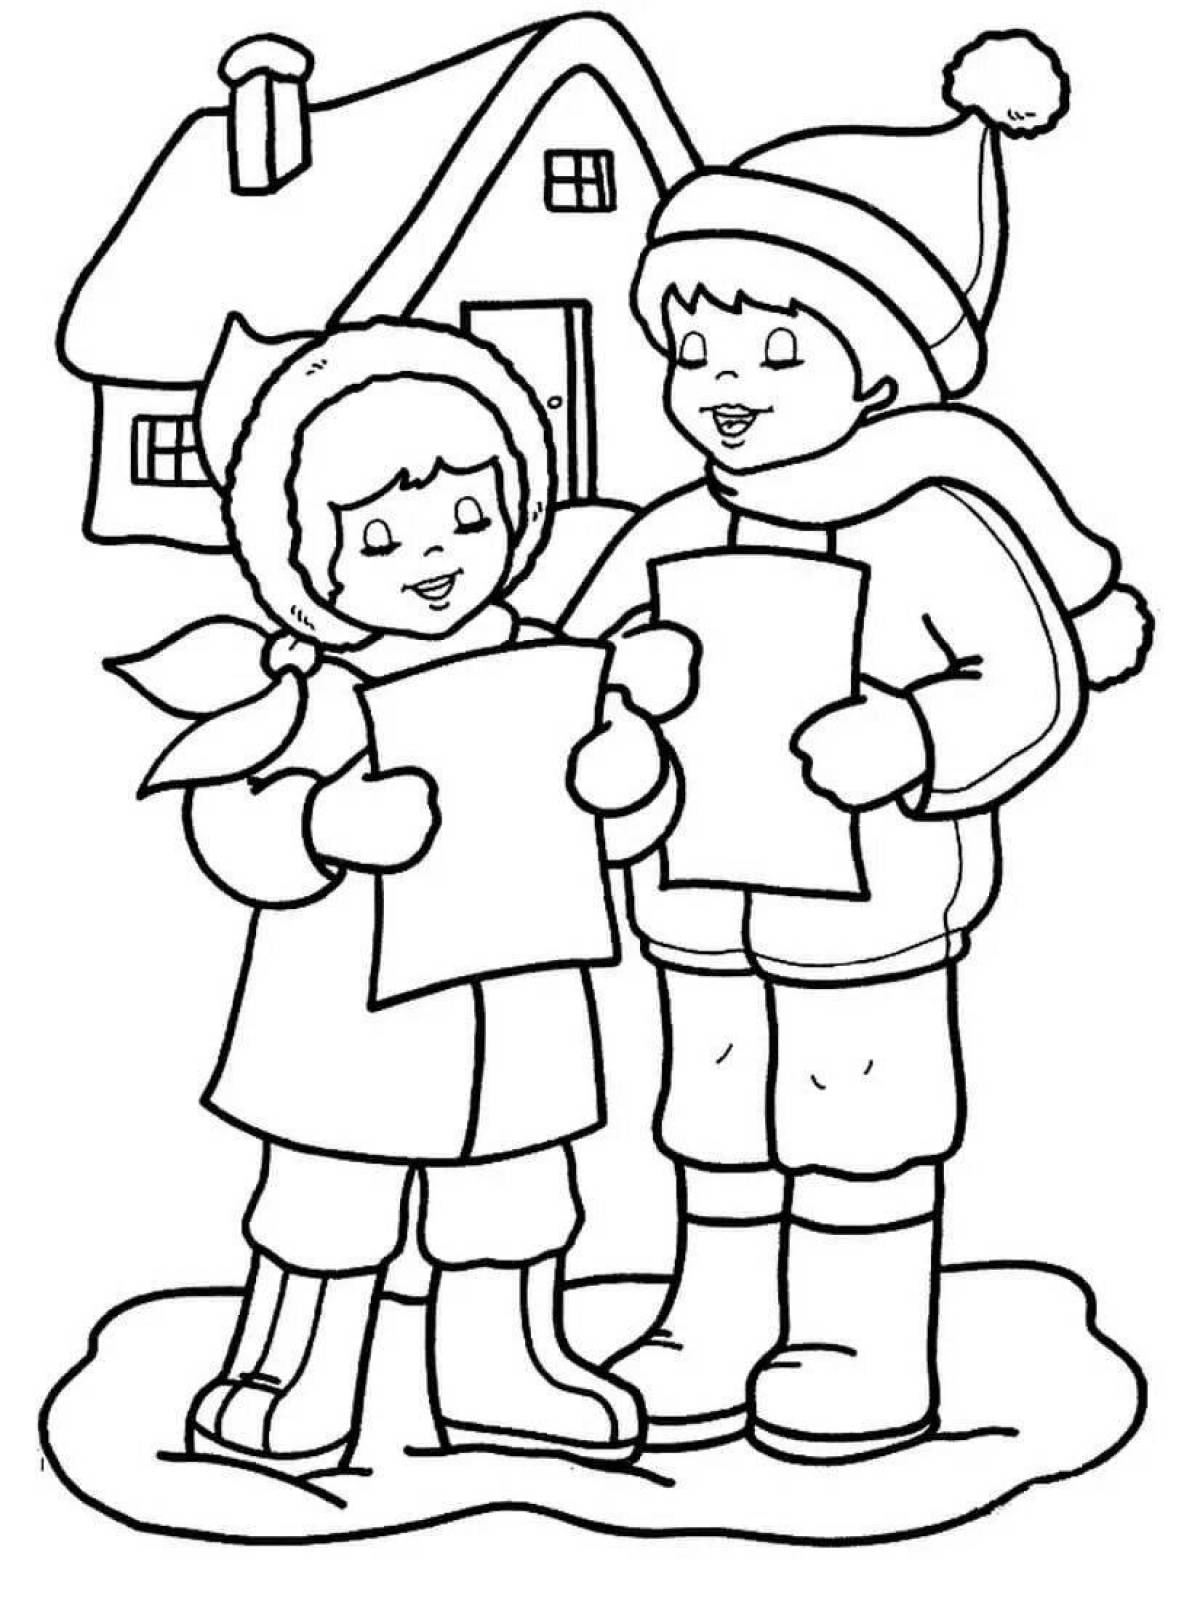 Adorable carol coloring pages for children aged 5-6